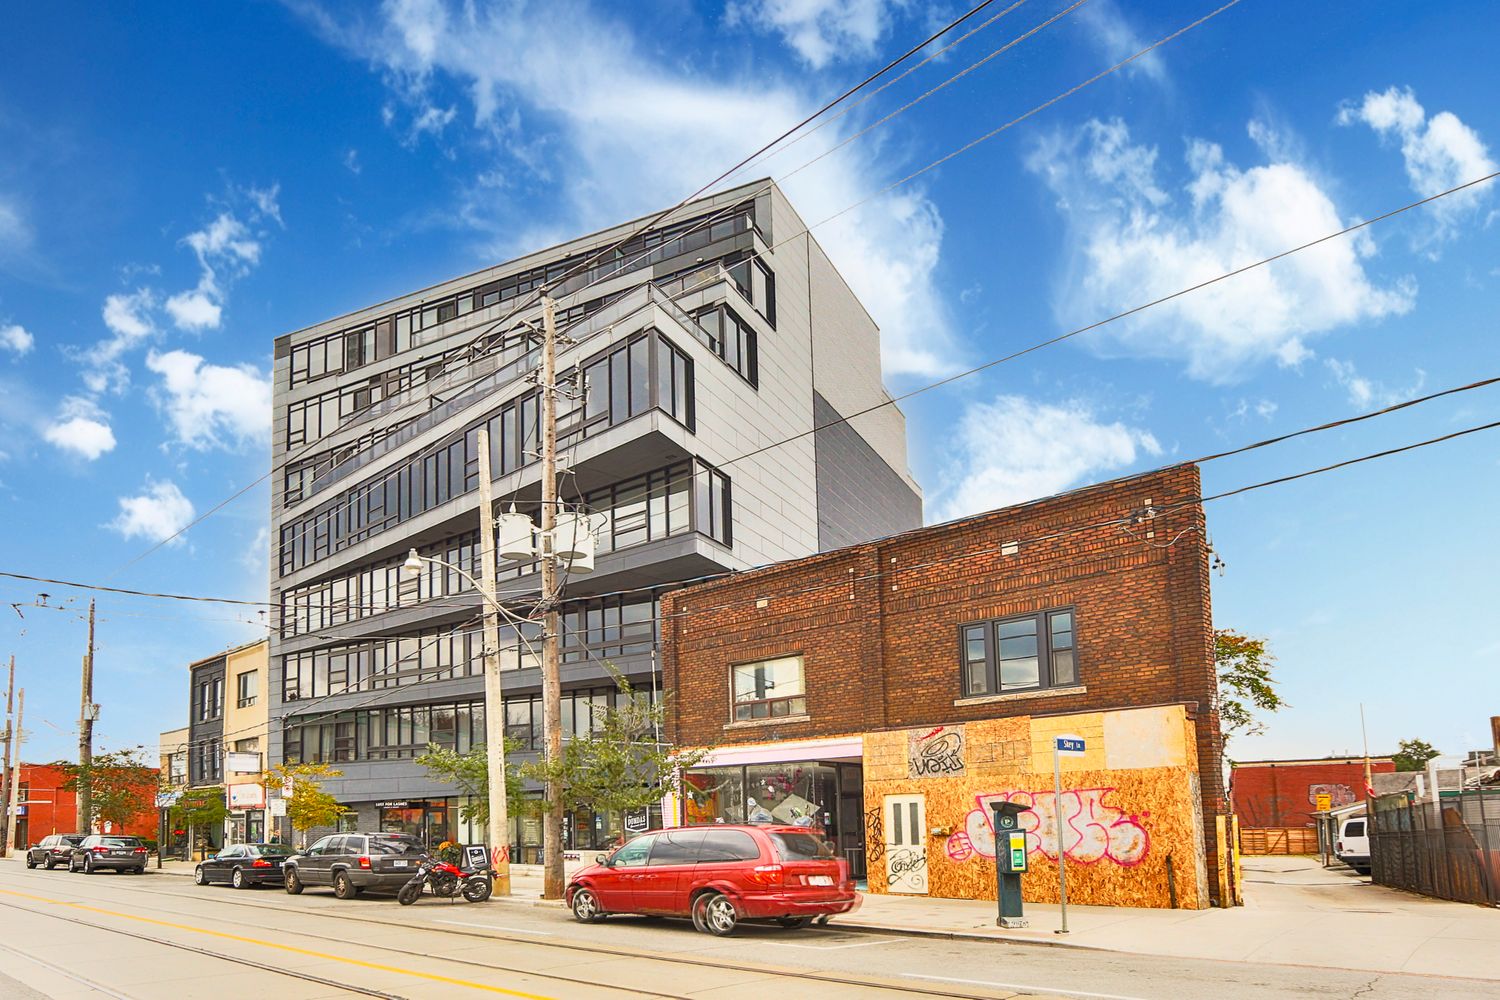 1239 Dundas Street W. Abacus Lofts is located in  West End, Toronto - image #1 of 5